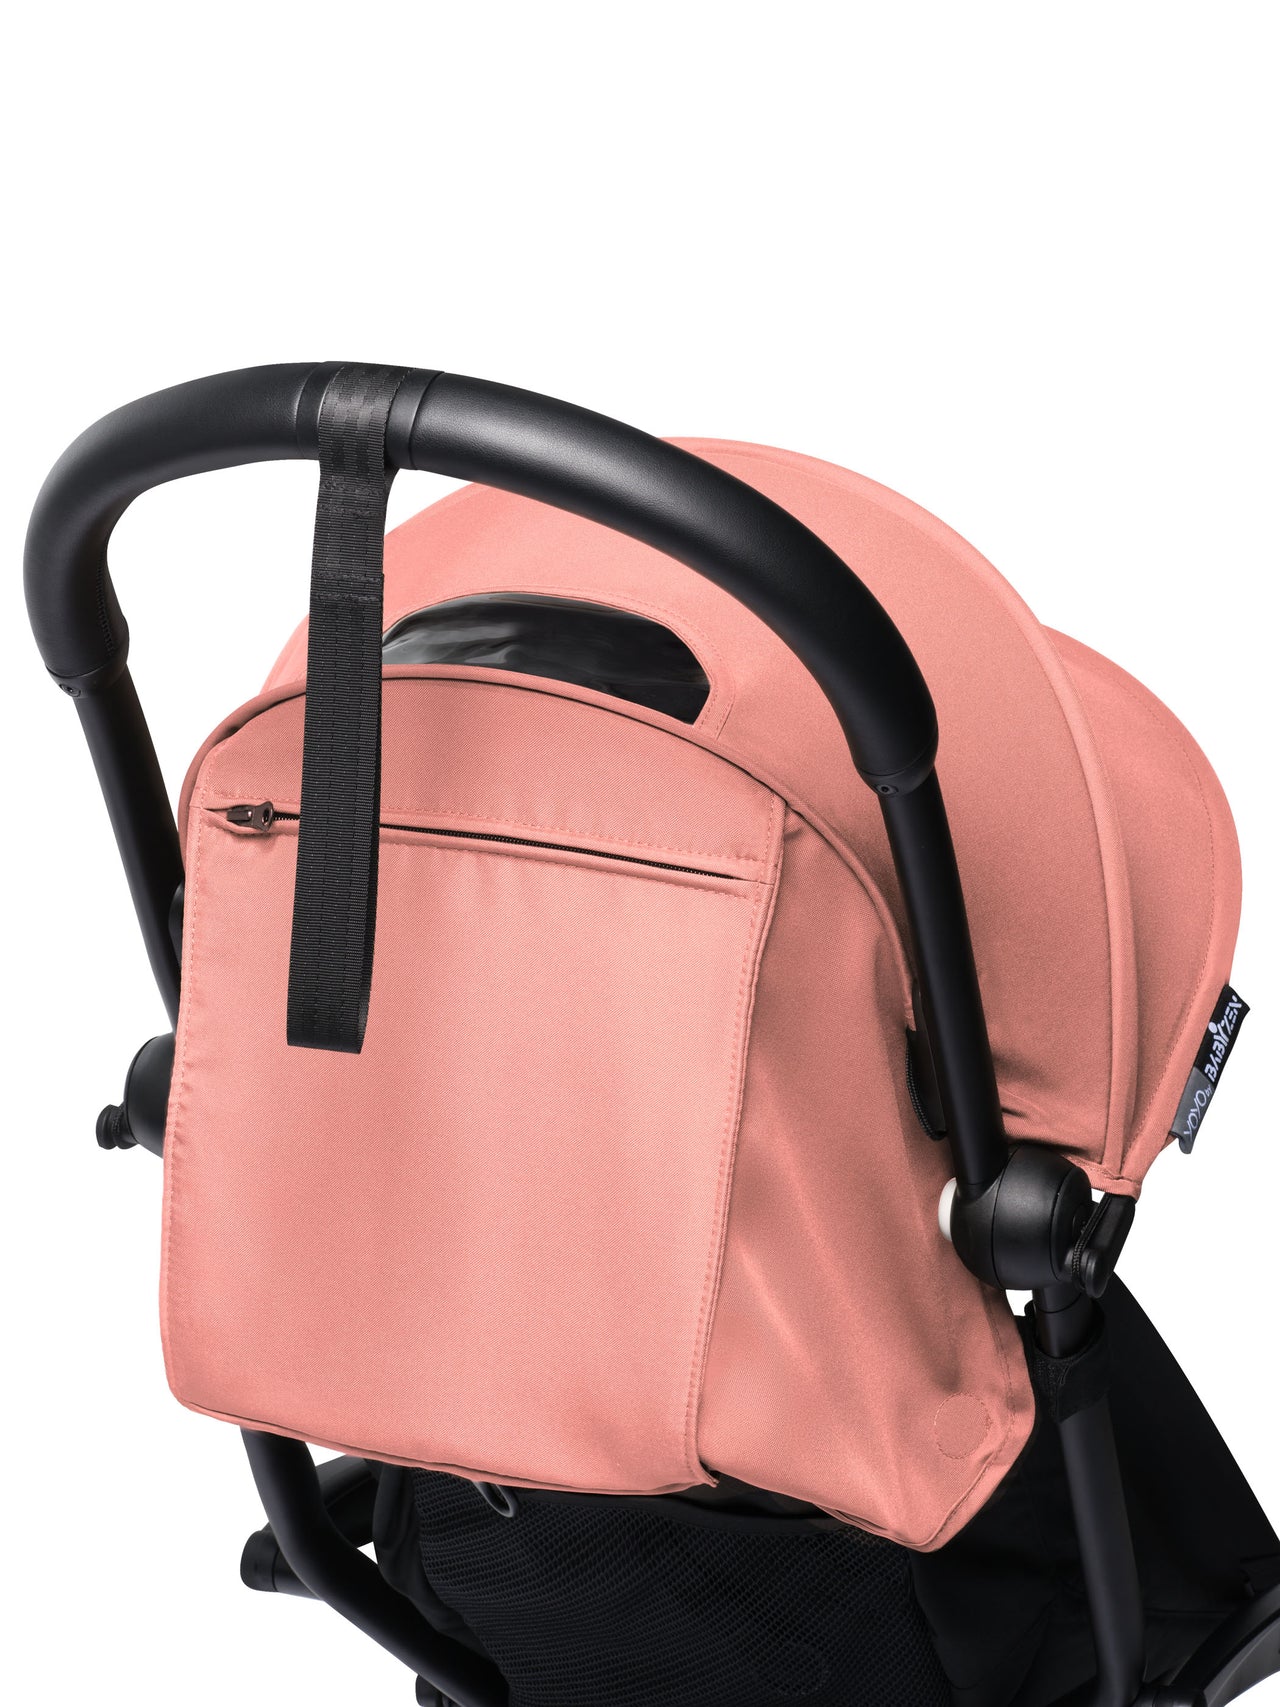 BABYZEN YOYO² 6+ Stroller - Ginger with FREE BACKPACK!